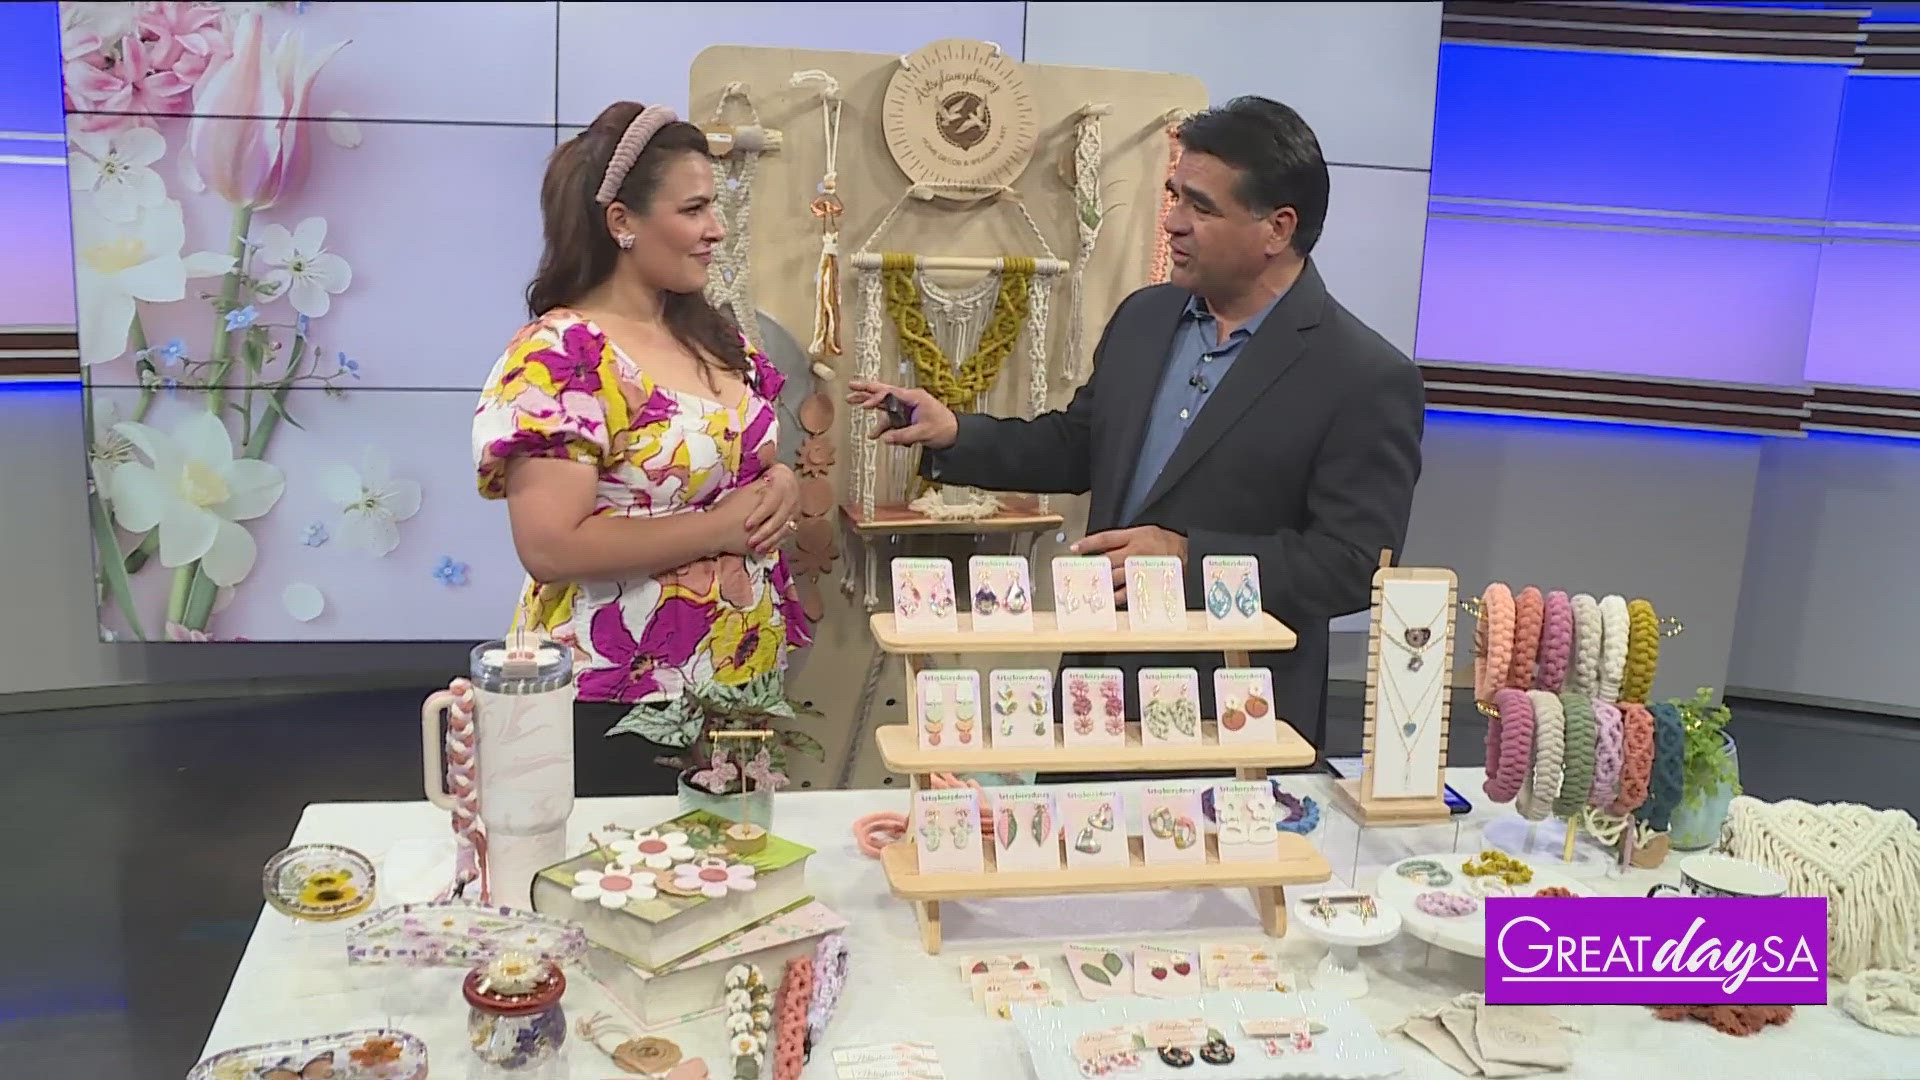 Linda J. Trinidad with Artsyloveydovey shares her macrame creations with Paul.